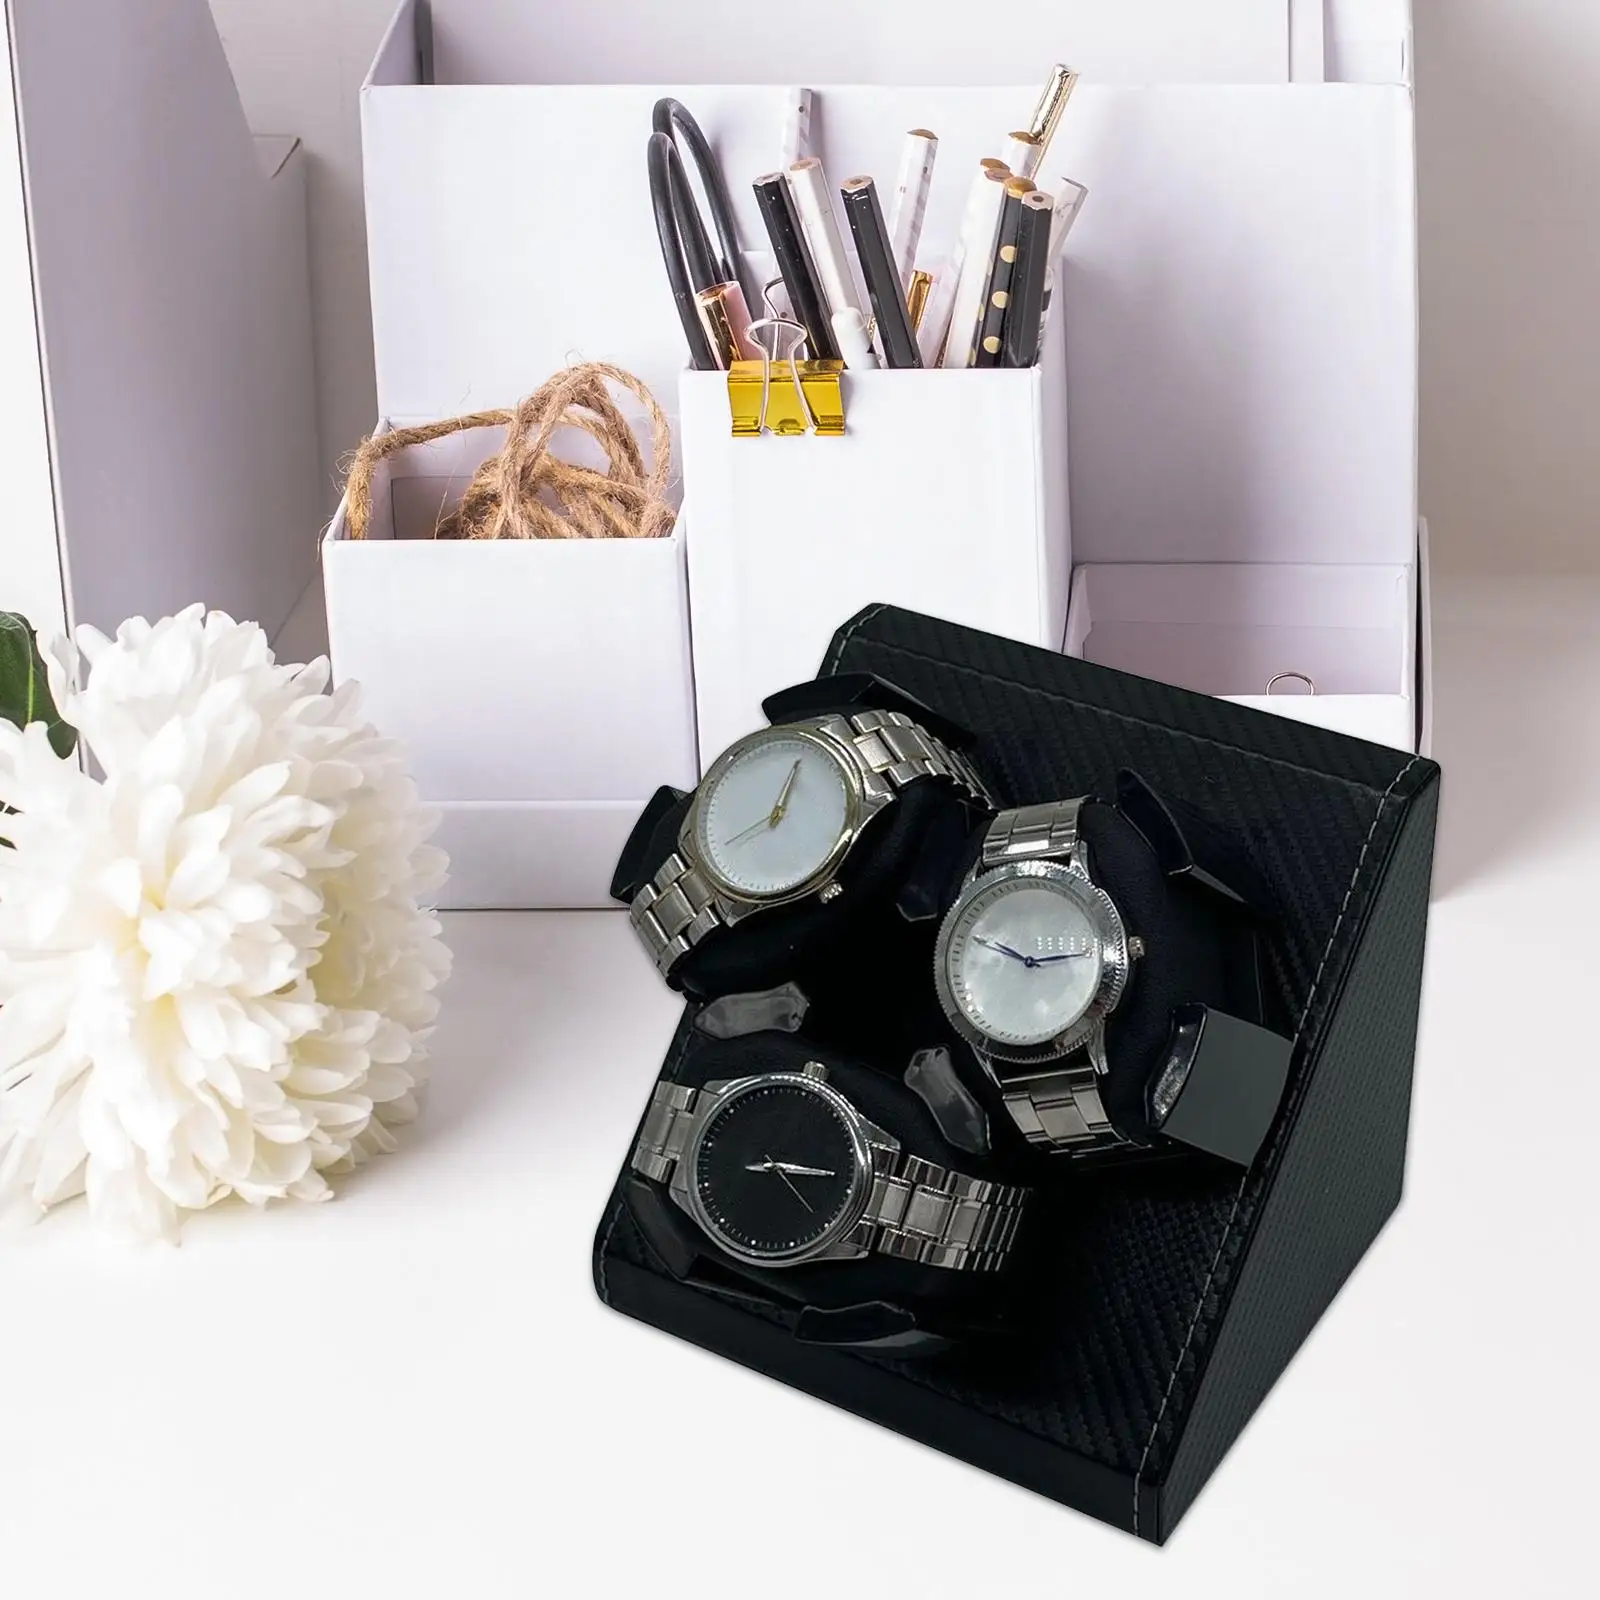 Watch Winder for Automatic Watch Motor Shaker Organizer Box Collector for Desktop Bedroom Gifts Wristwatch Mechanical Watches